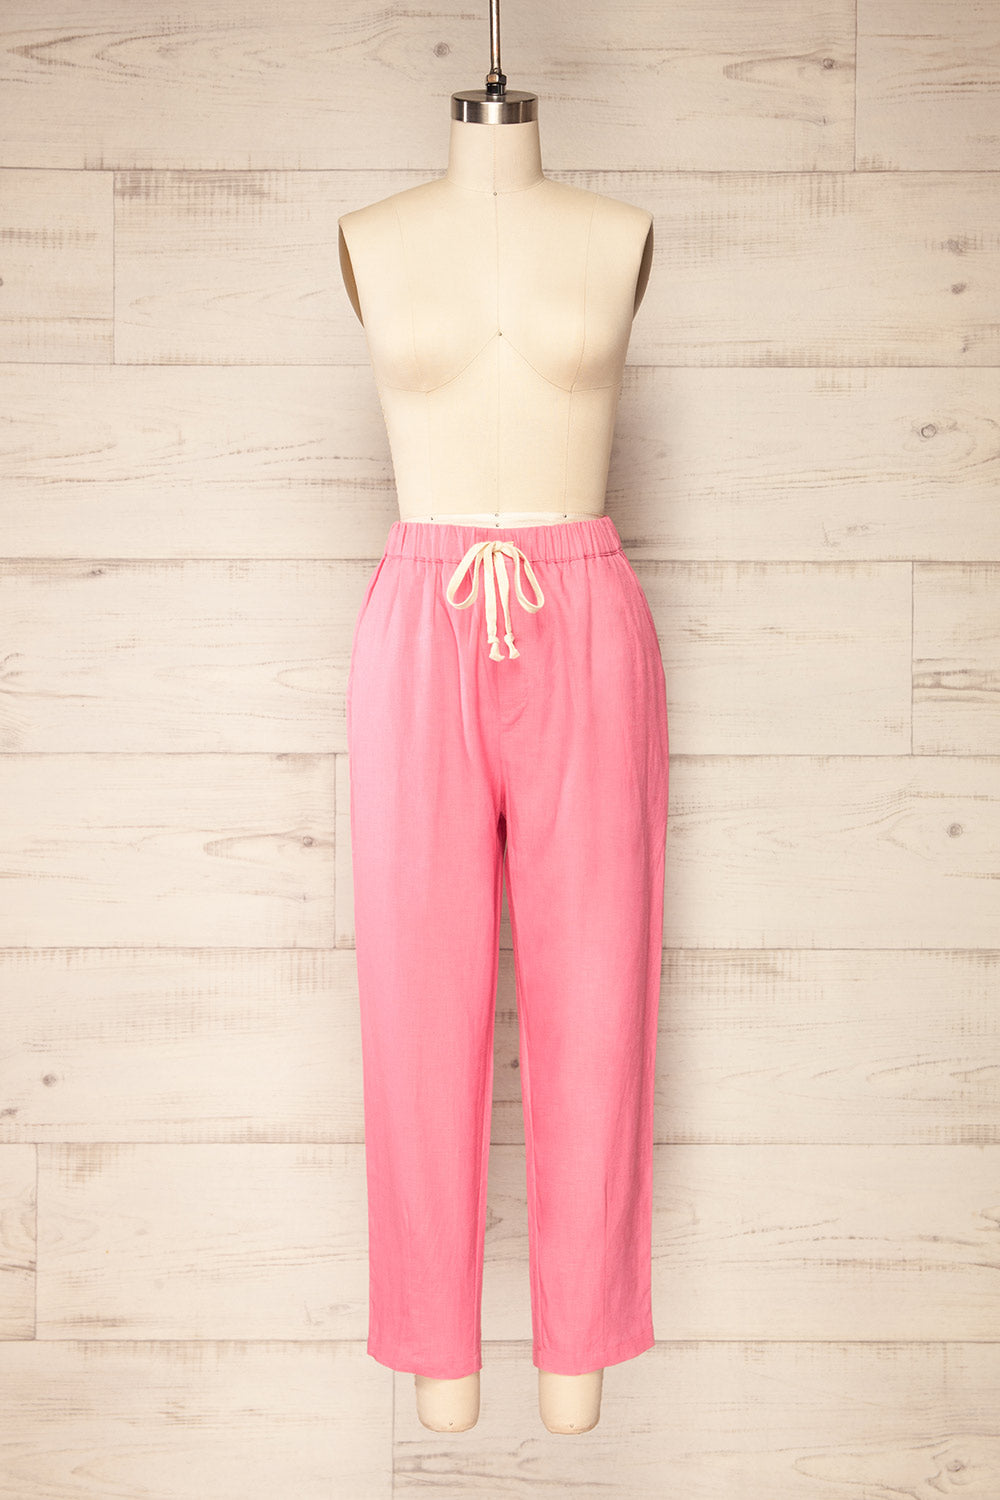 Trincao Pink | Linen Pants with Drawstrings